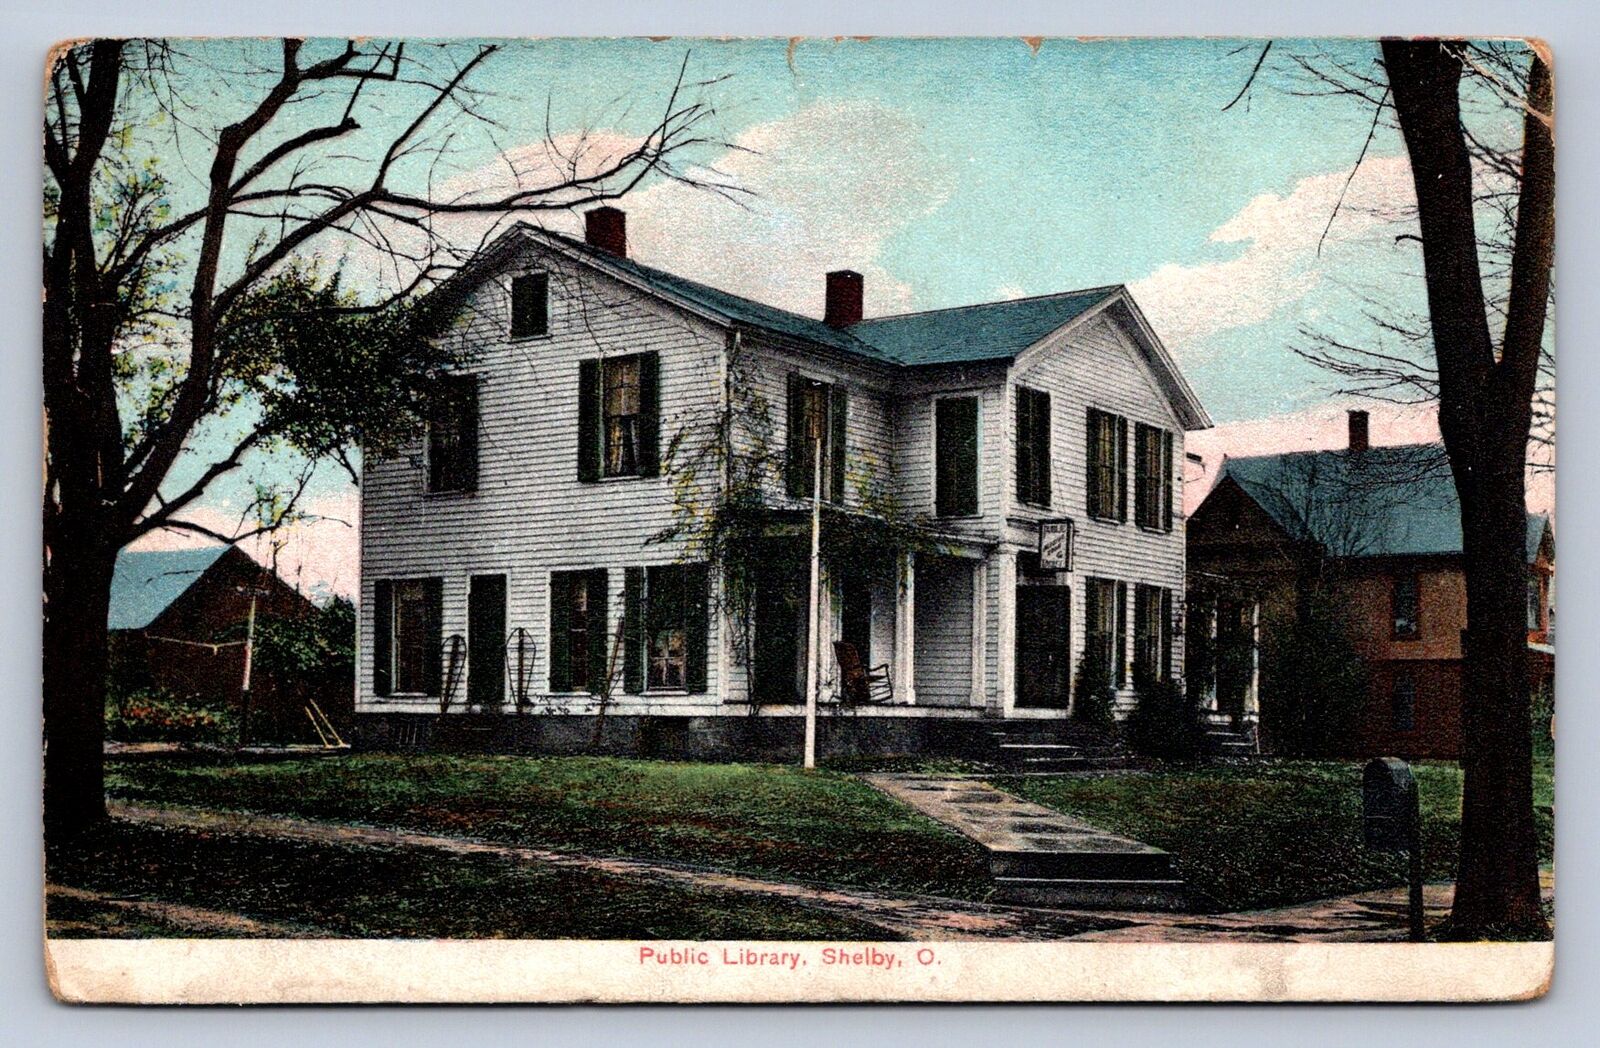 J97/ Shelby Ohio Postcard c1910 Richland County Public Library Building 13